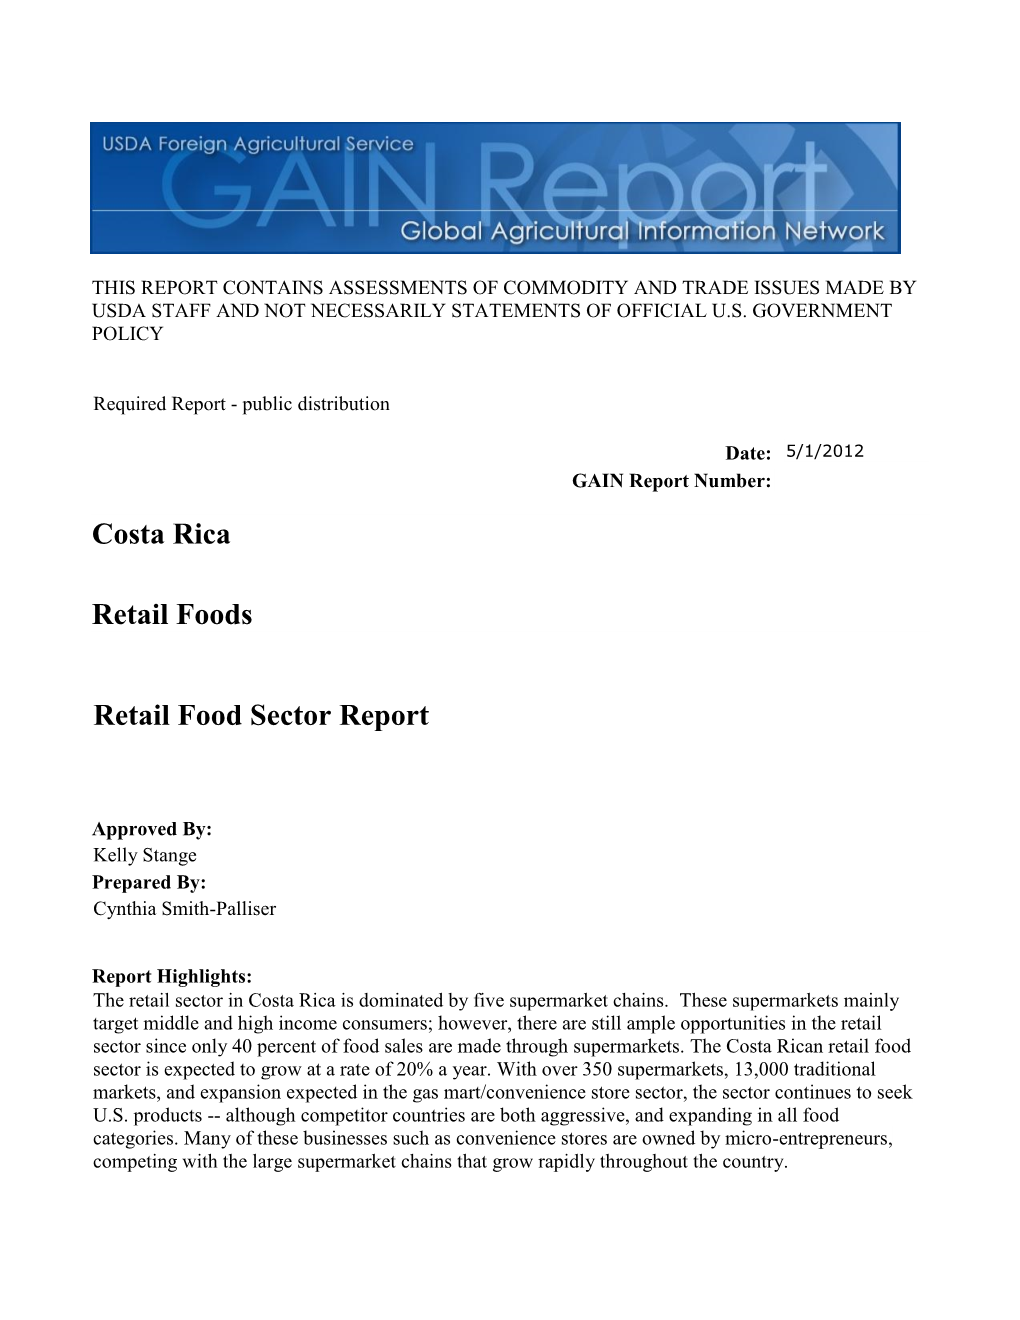 Retail Food Sector Report Retail Foods Costa Rica